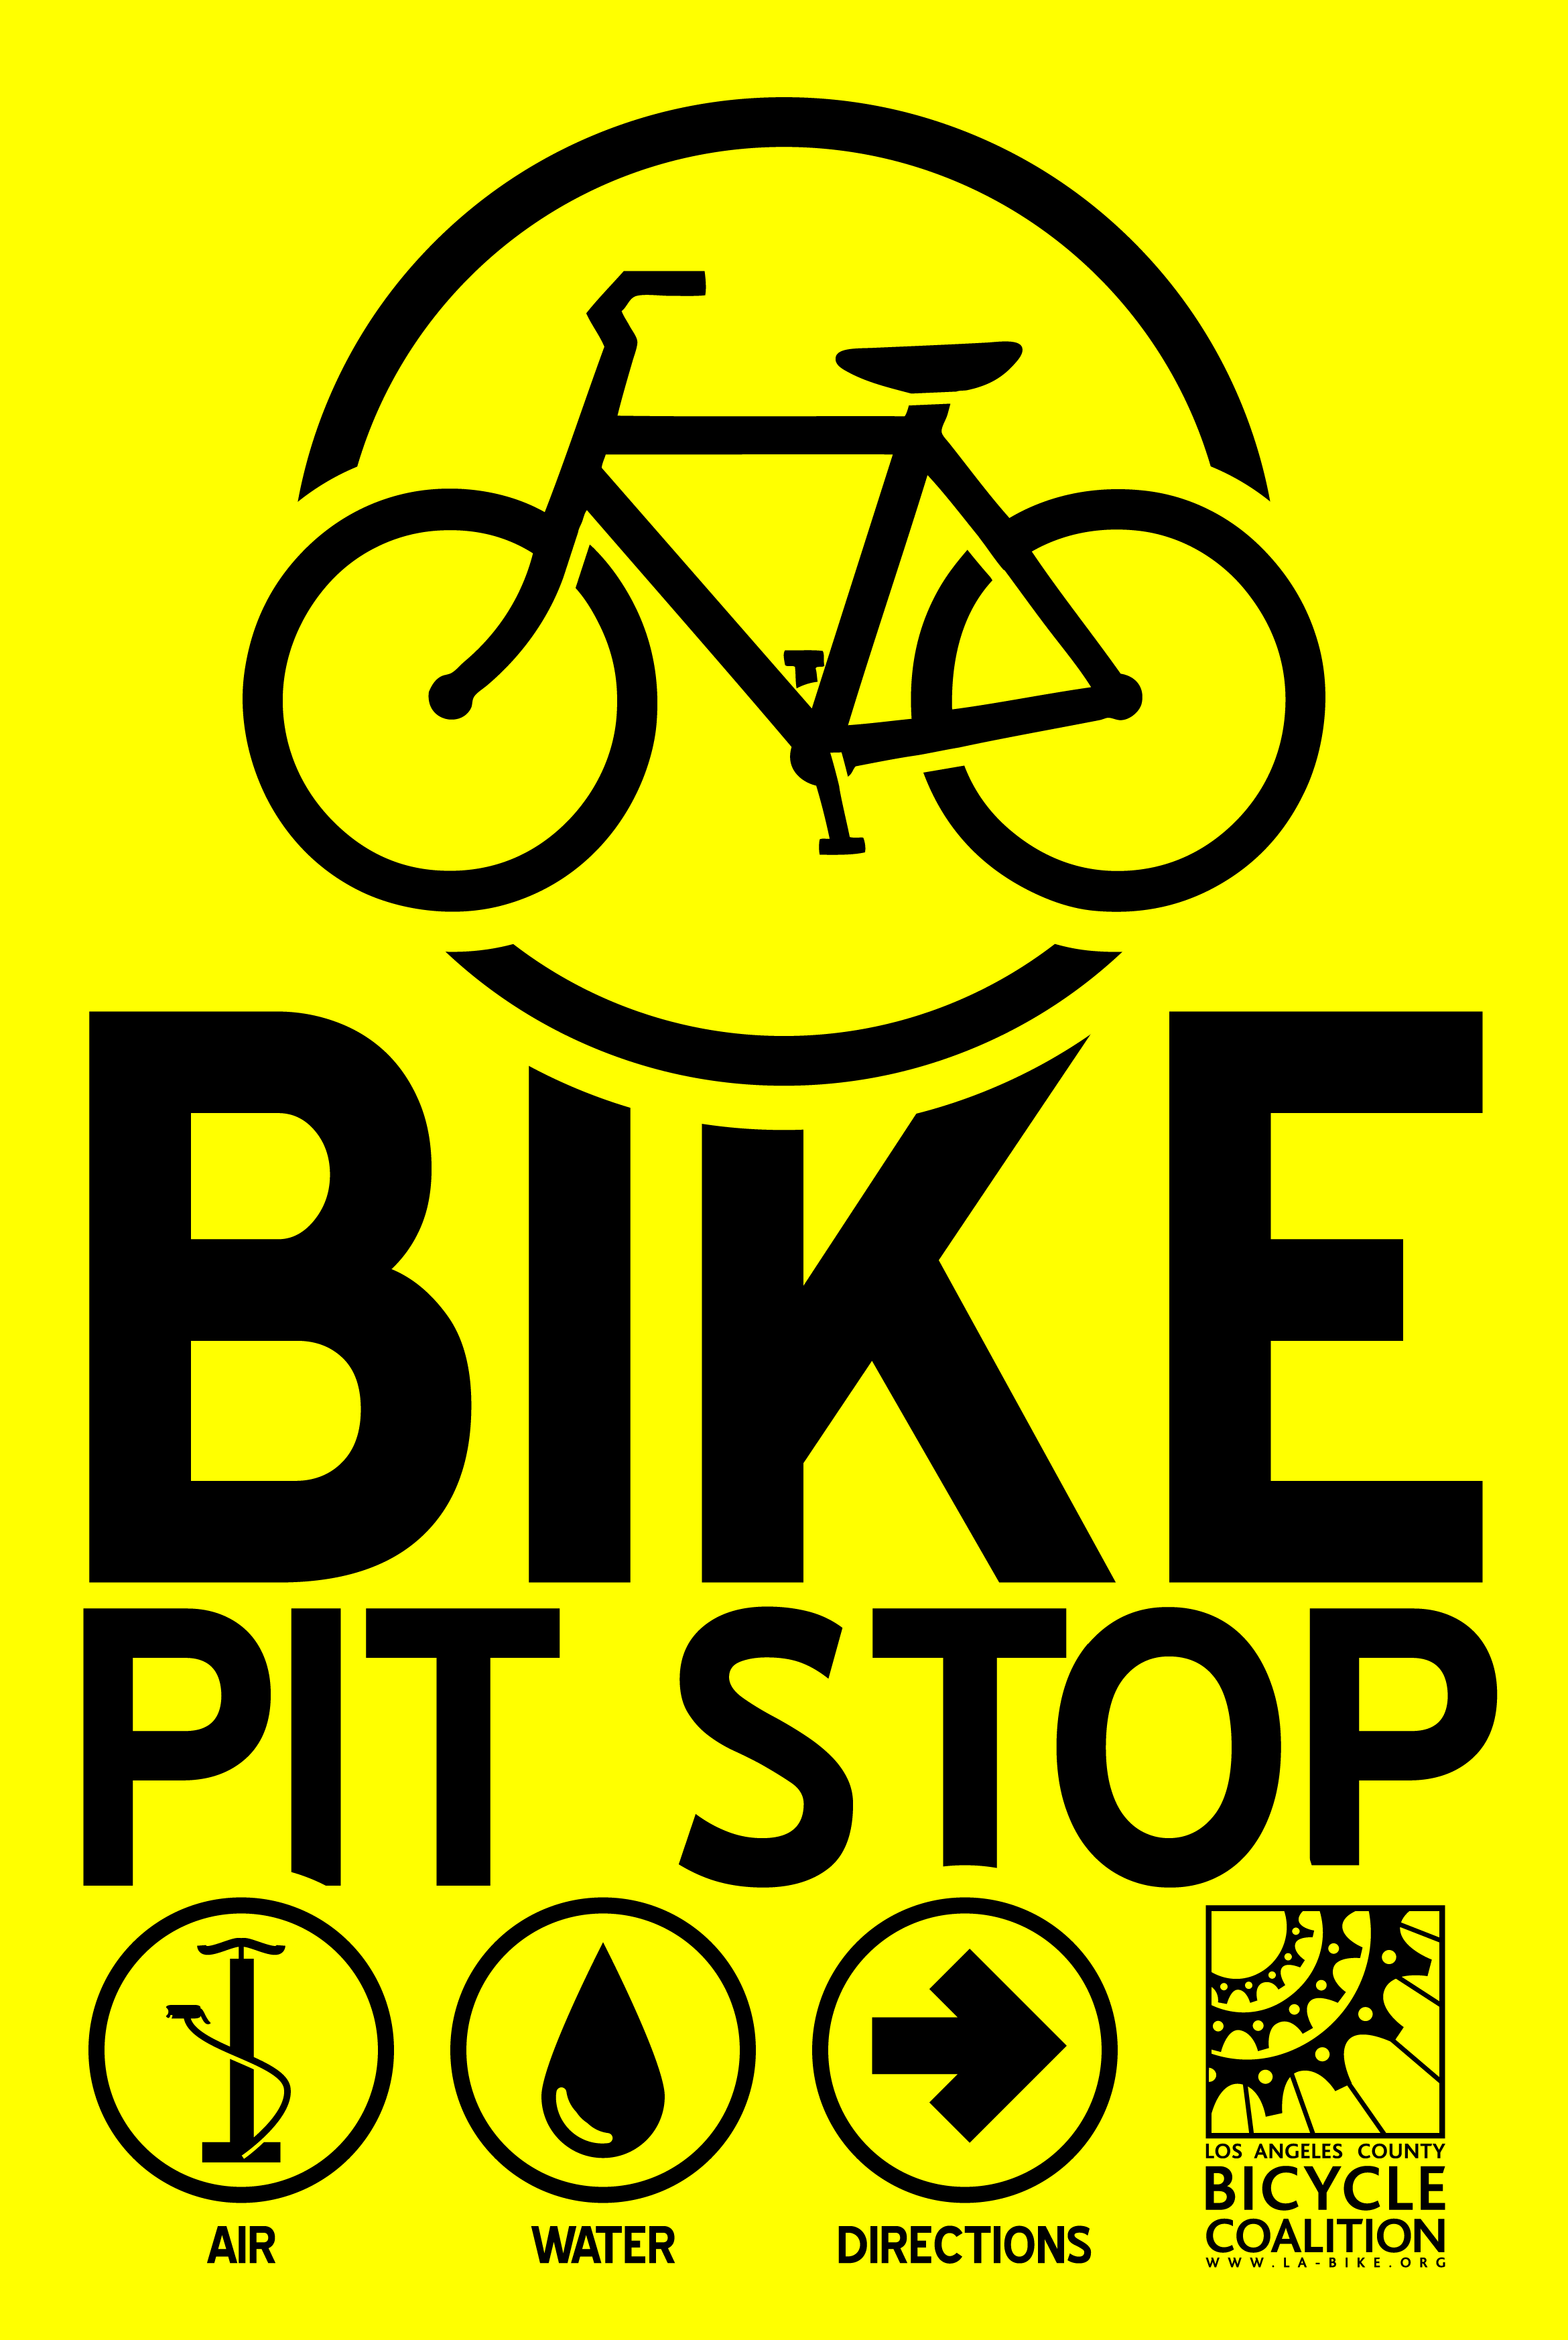 Bike Pit Stop poster for CicLAvia cycling event, designed for the Los Angeles County Bicycle Coalition.